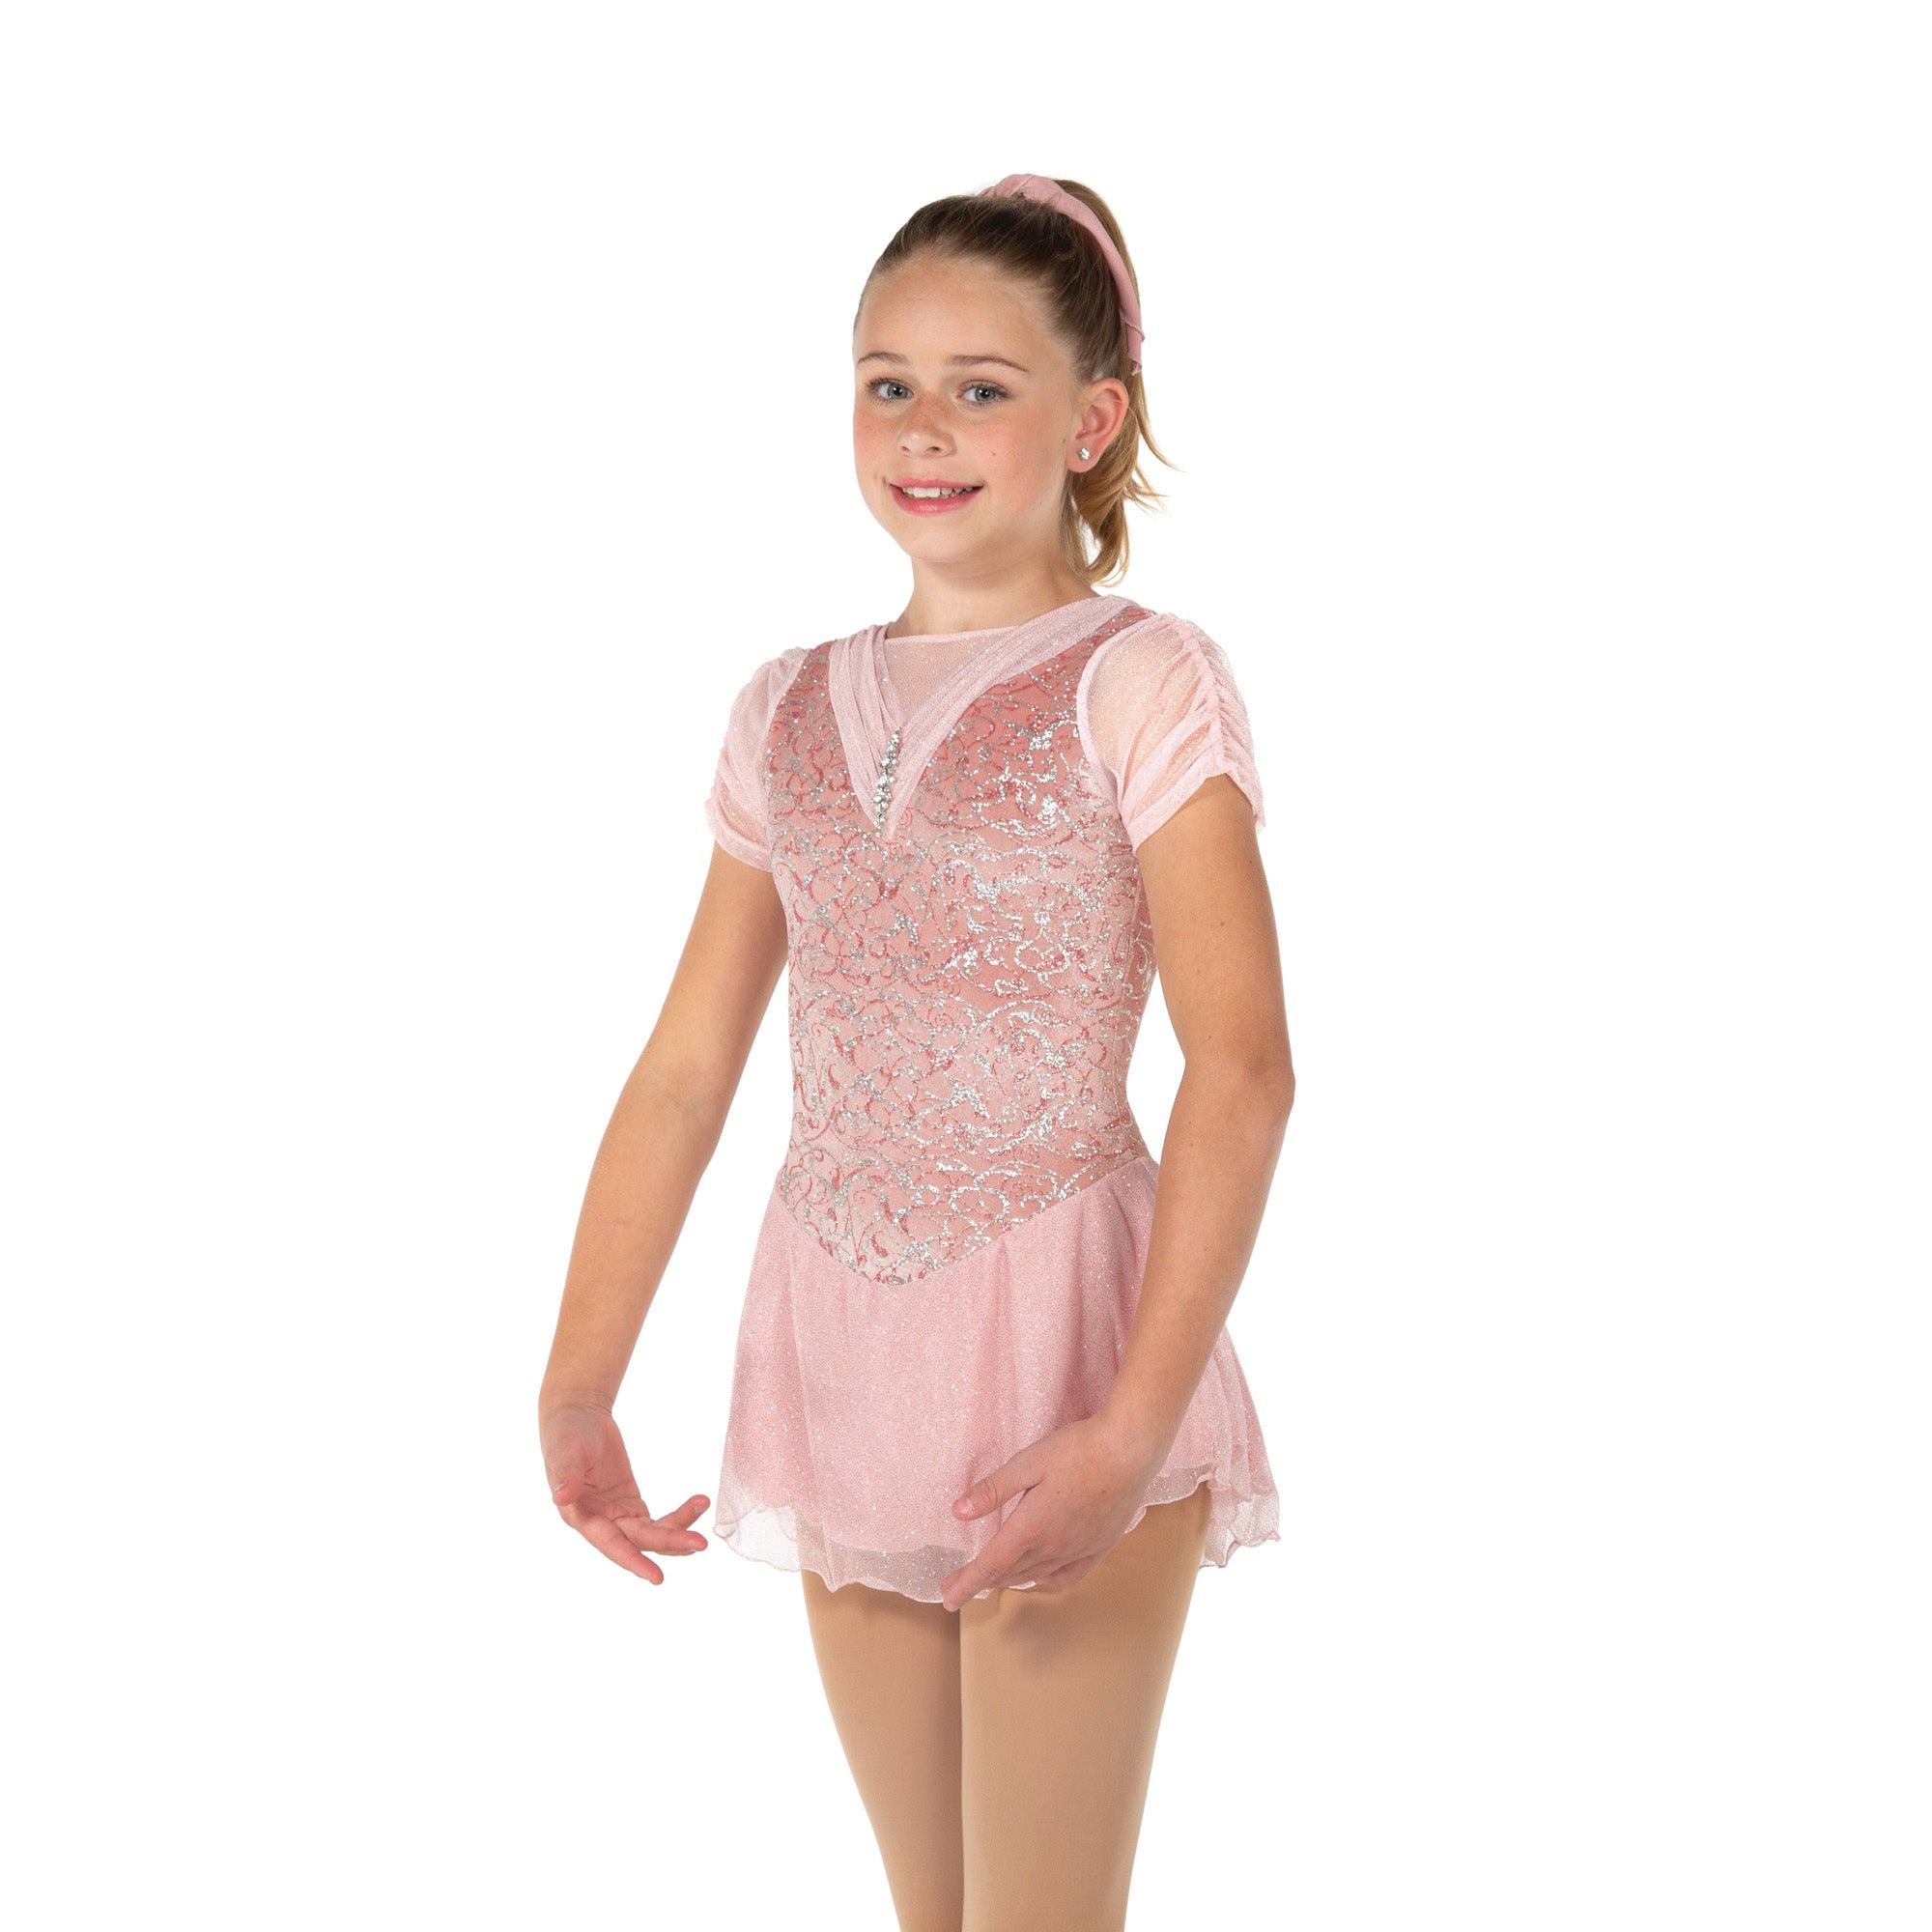 20 Palest of Roses Skating Dress in Blush Pink by Jerry's